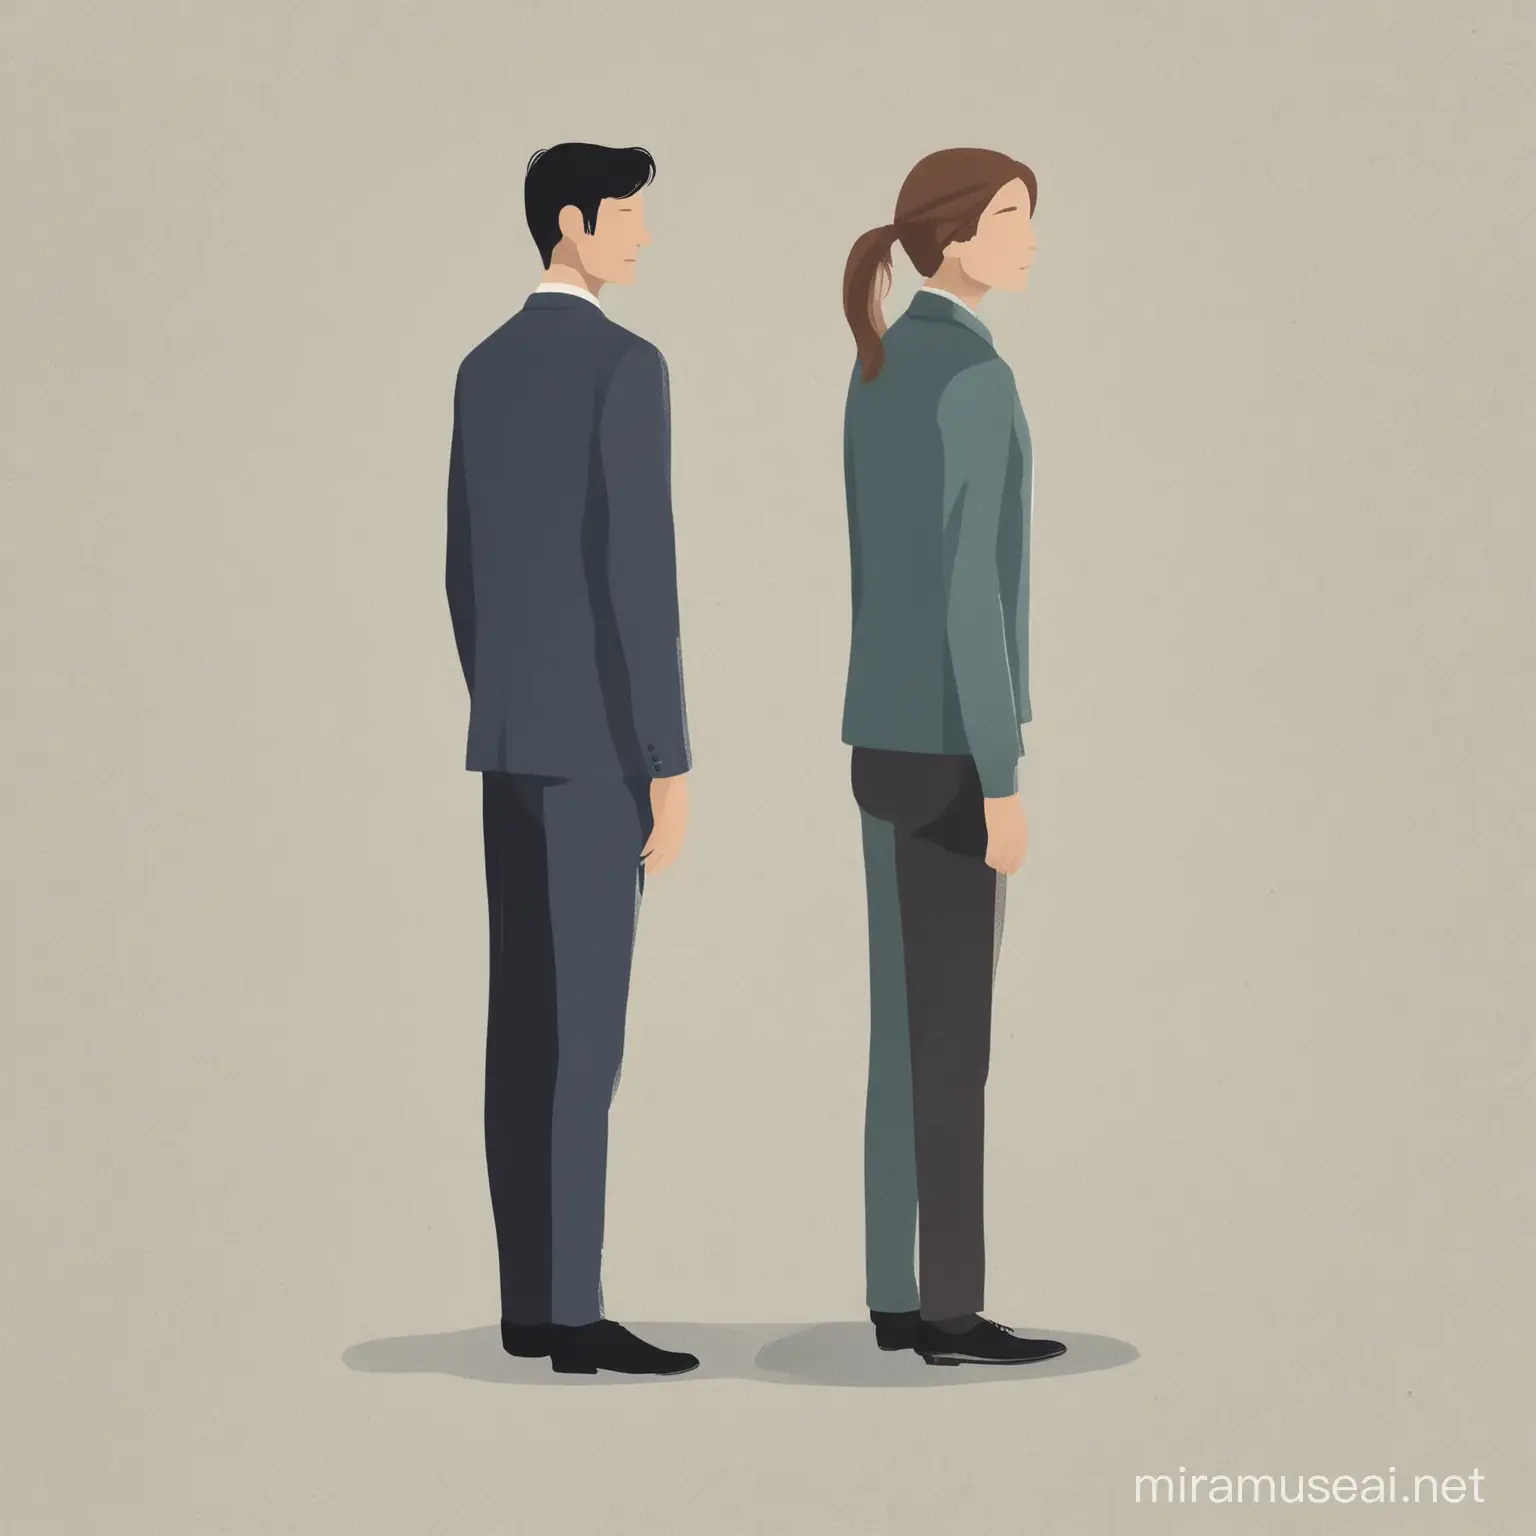 An illustration or image representing two people in close proximity, such as standing next to each other